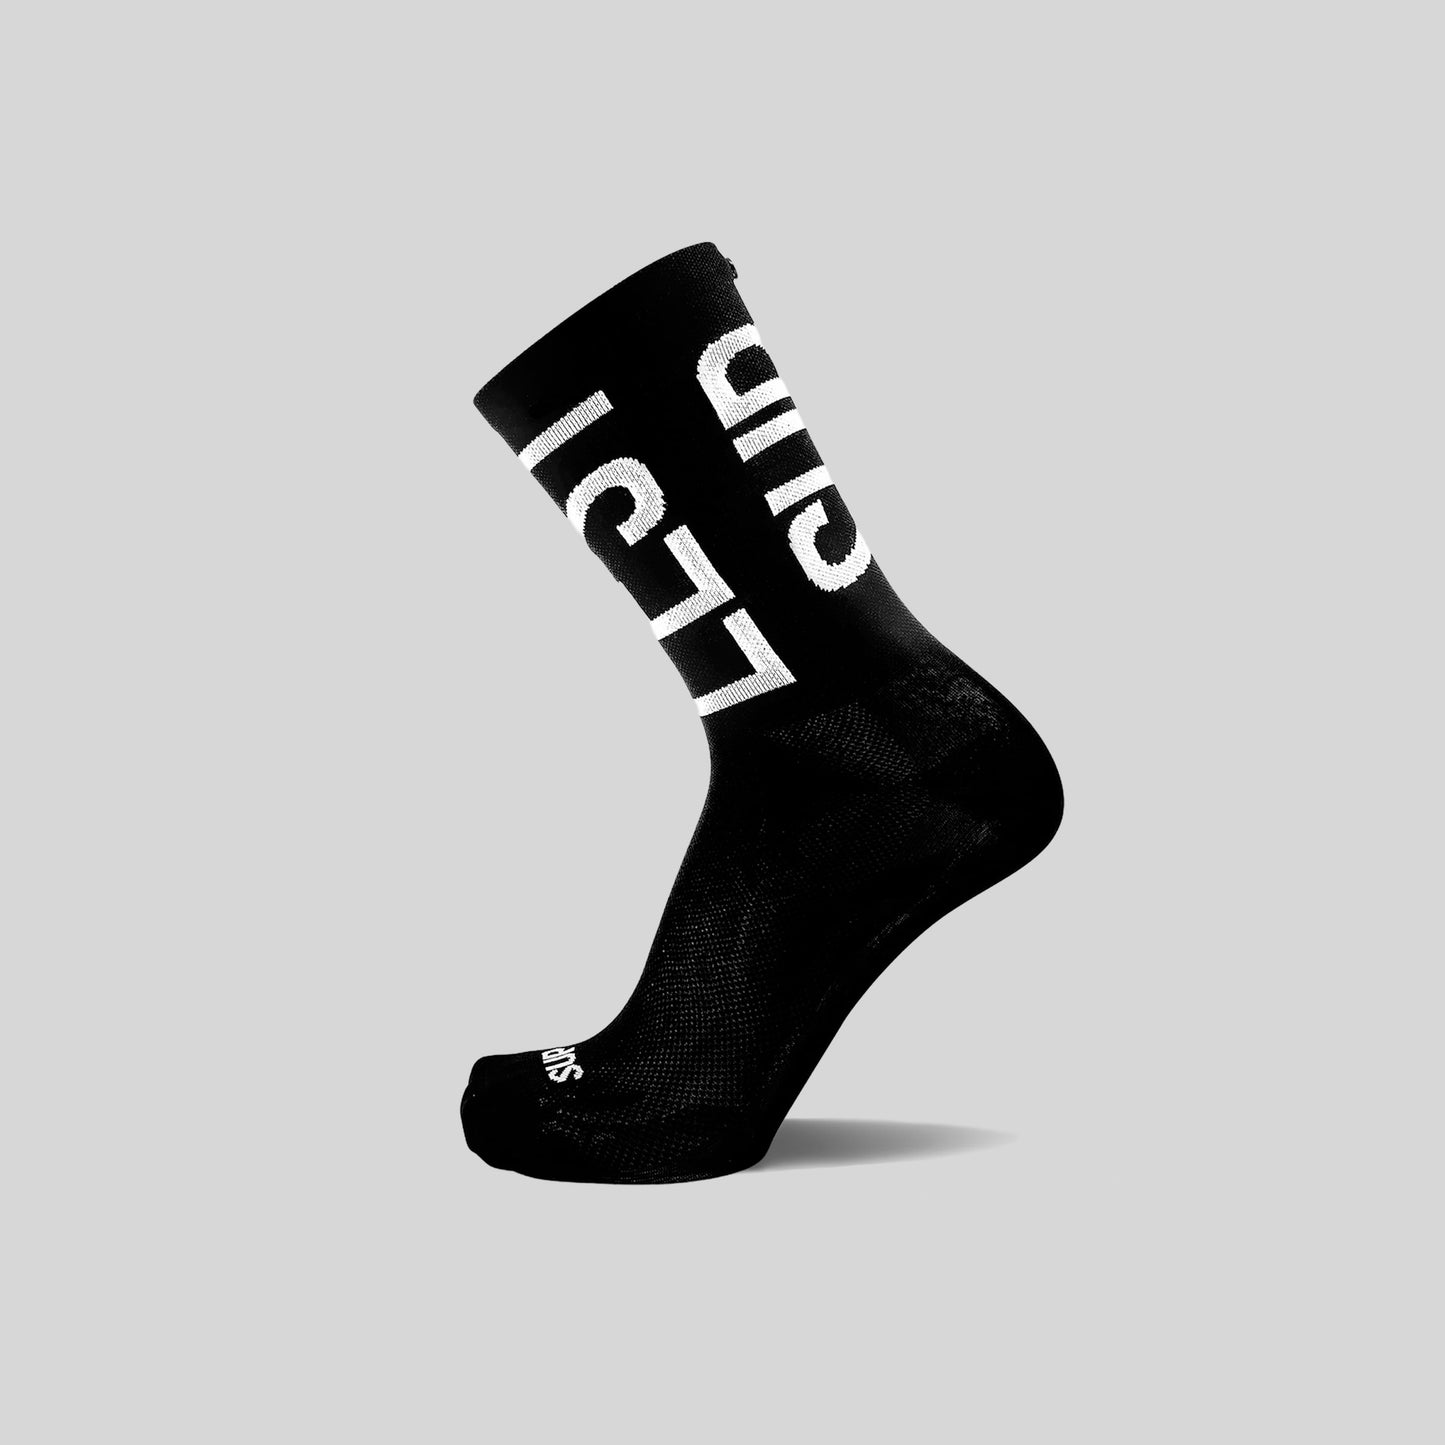 Suplest x Fingercrossed Typo Black Socks from Ascender Cycling Club in Zürich Switzerland Side View